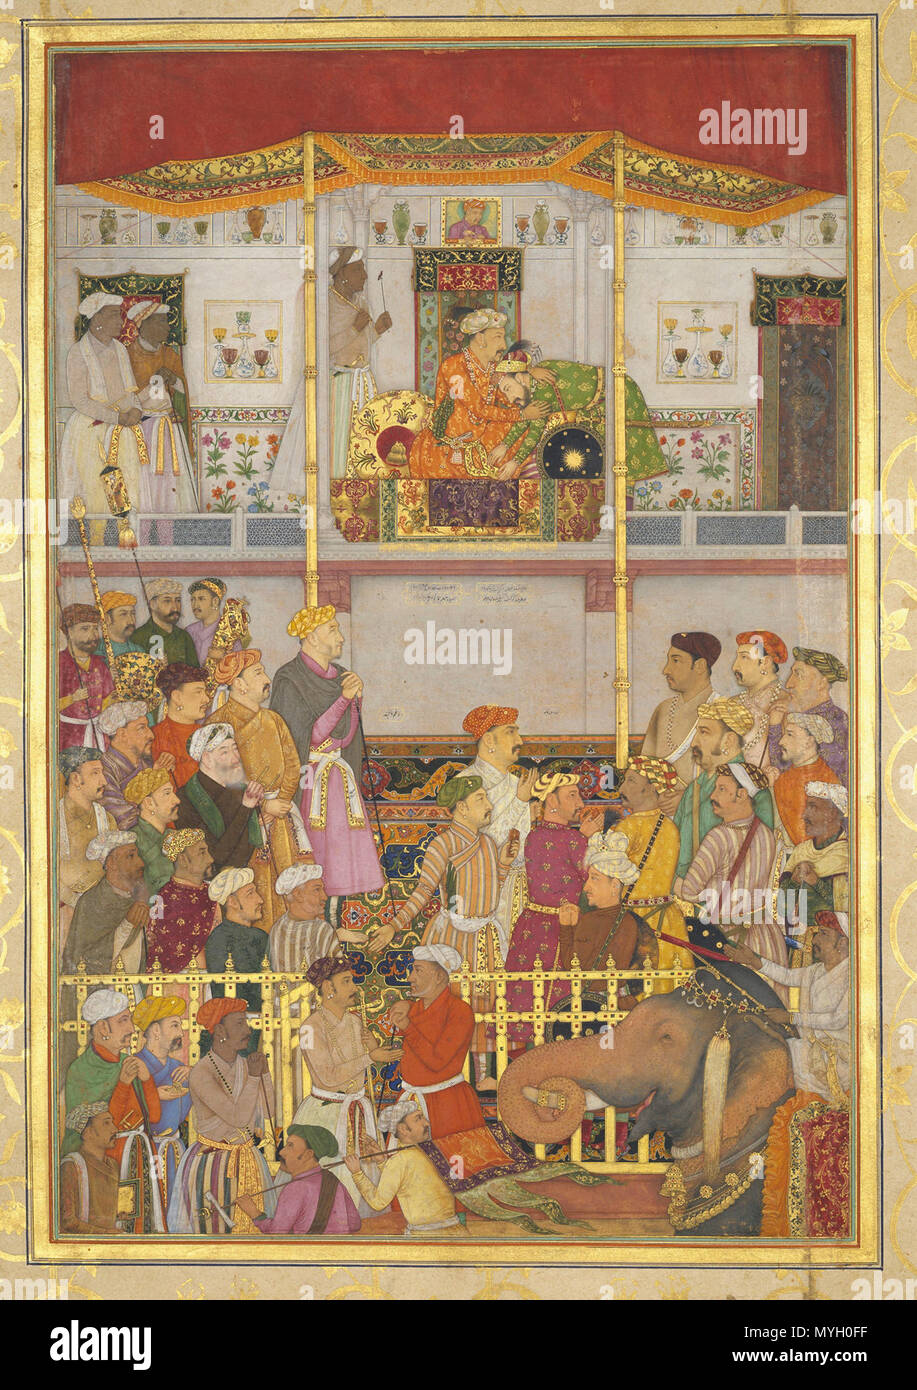 . English: Jahangir Receives Prince Khurram at Ajmer on His Return from the Mewar Campaign: Page from the Windsor Padshahnama Balchand (active 1595–ca. 1650) Date: ca. 1635 Culture: India (Mughal court at Lahore or Daulatabad) Medium: Opaque watercolor and gold on paper Dimensions: Page: 22 15/16 x 14 7/16 in. (58.2 x 36.7 cm) Image: 11 15/16 x 7 15/16 in. (30.4 x 20.1 cm) Mounted: 32 x 24 in. (81.3 x 61 cm) Framed: 35 3/4 x 27 11/16 x 1 in. (90.8 x 70.4 x 2.6 cm) Classification: Painting Credit Line: Lent by Her Majesty Queen Elizabeth II Accession Number: SL.17.2011.13.1 Rights and Reproduct Stock Photo